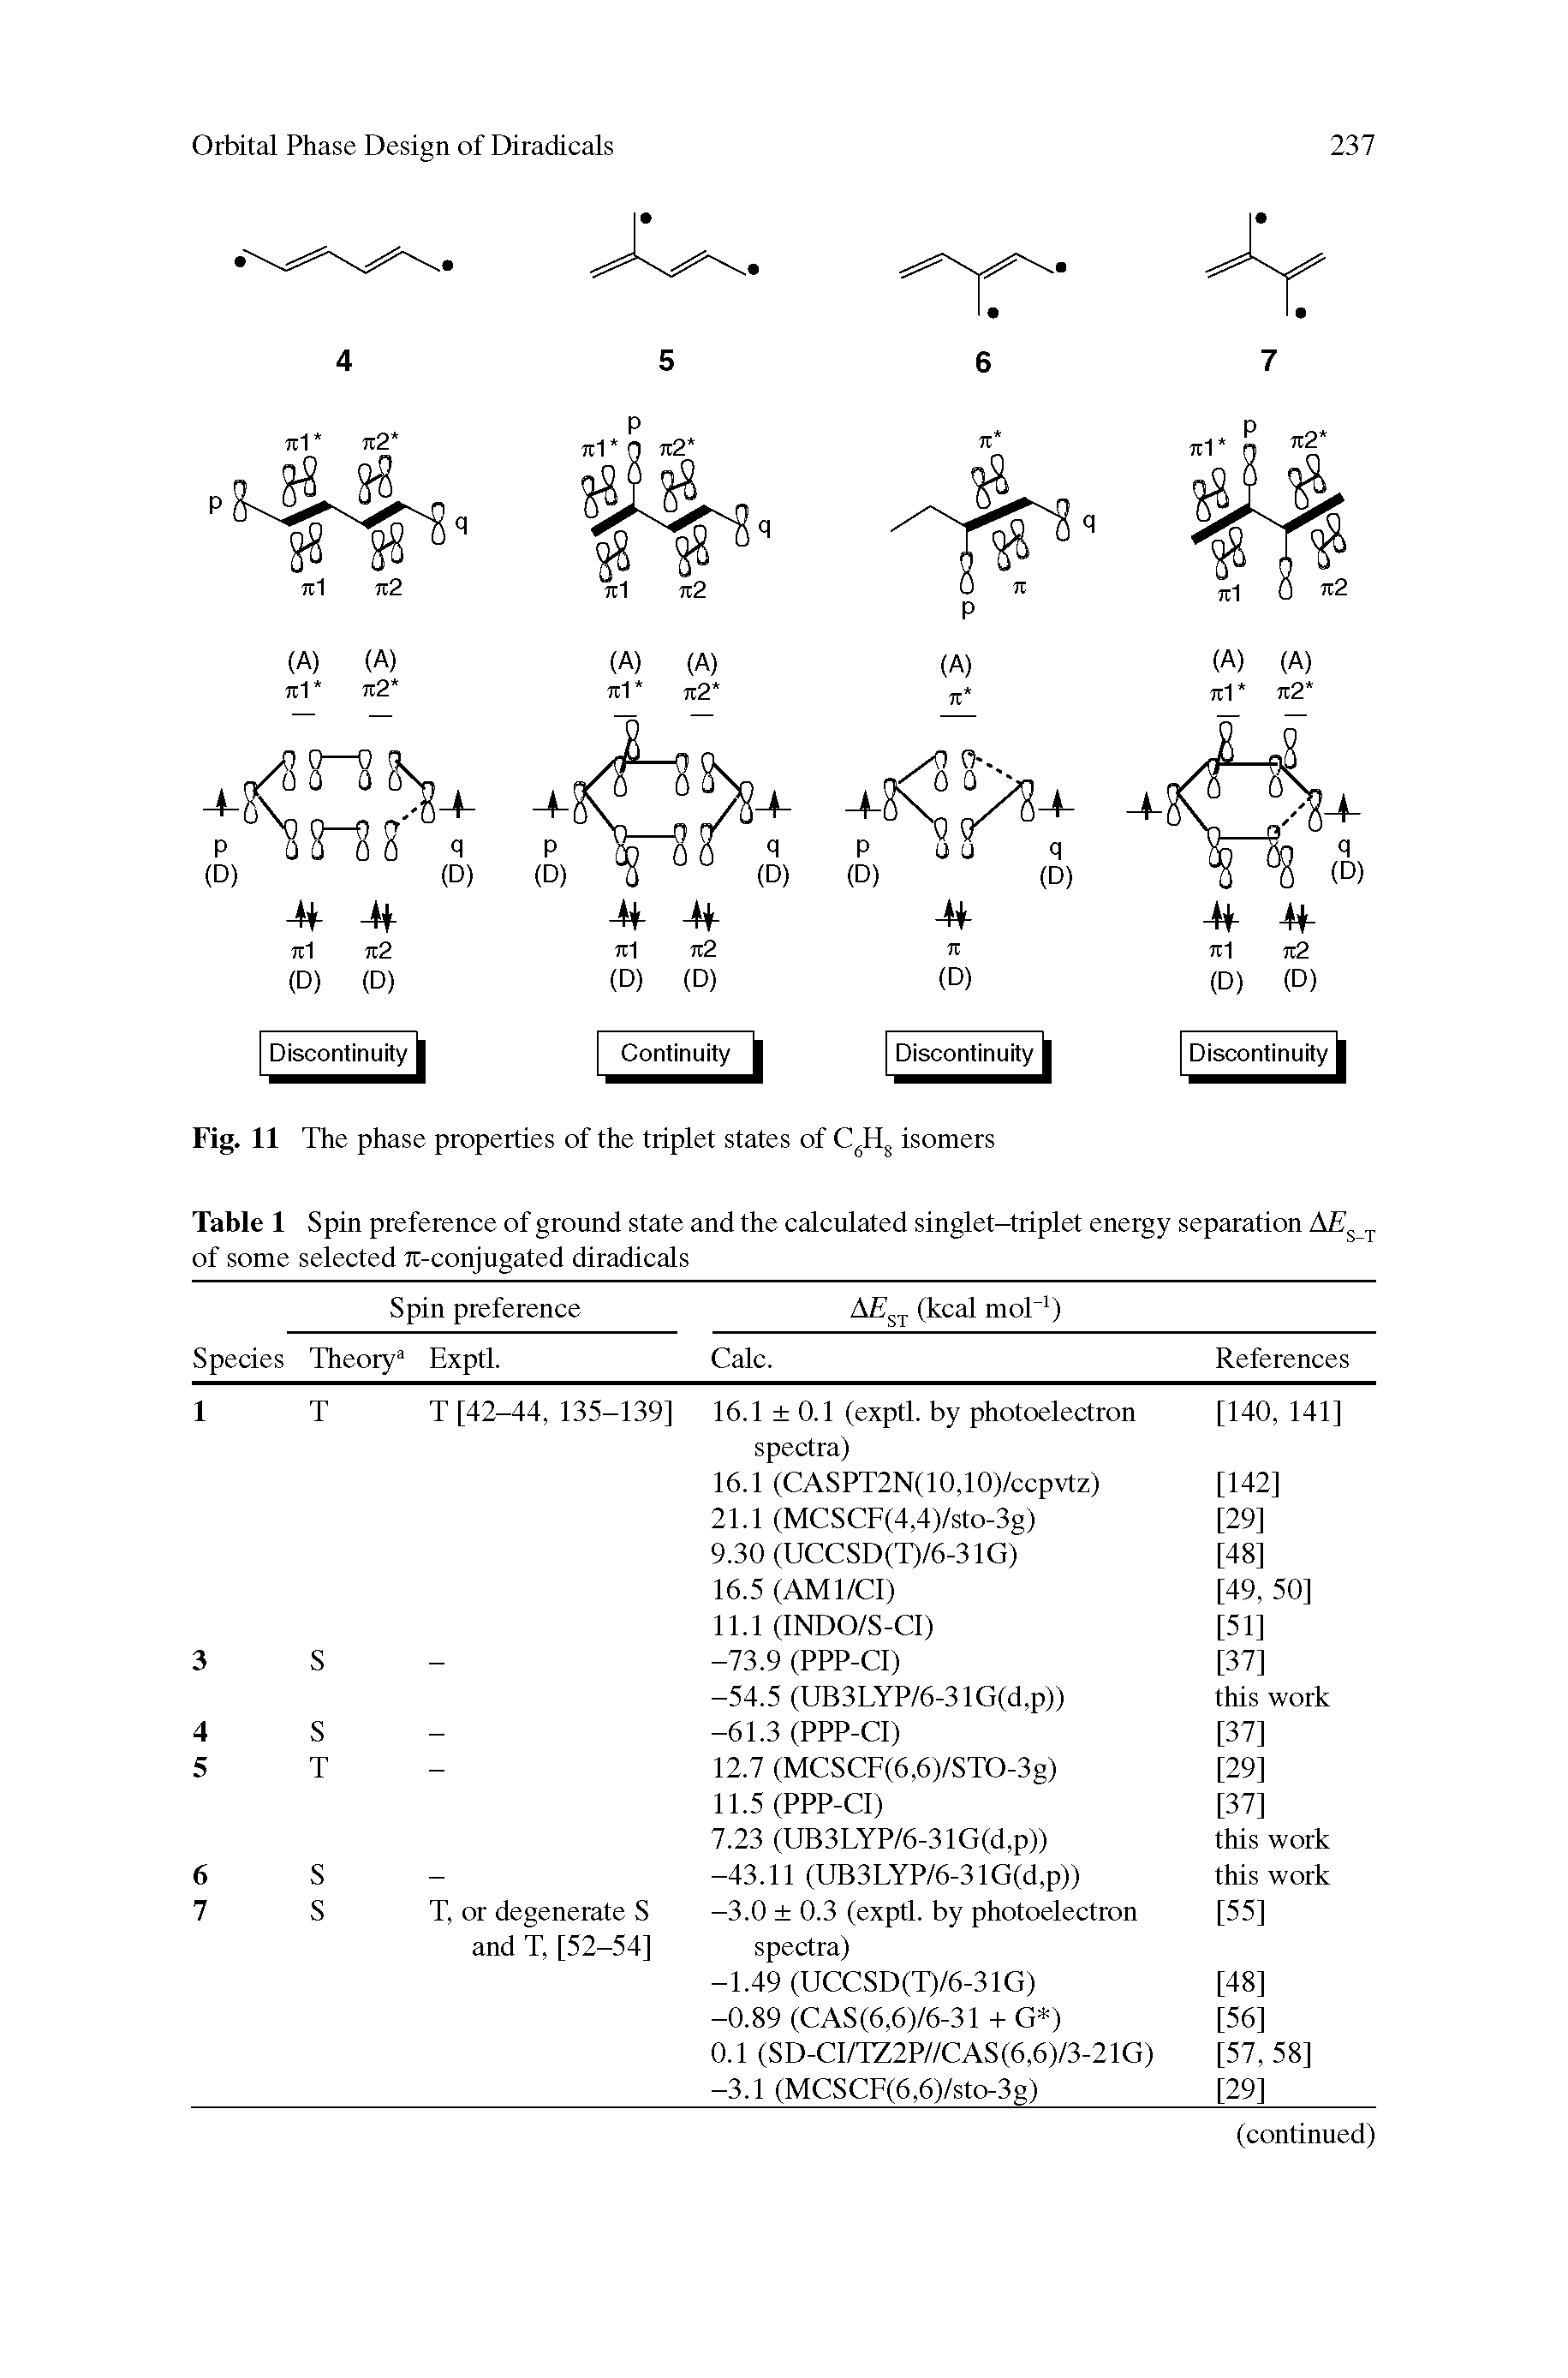 Table 1 Spin preference of ground state and the calculated singlet-triplet energy separation of some selected Jt-conjugated diradicals...